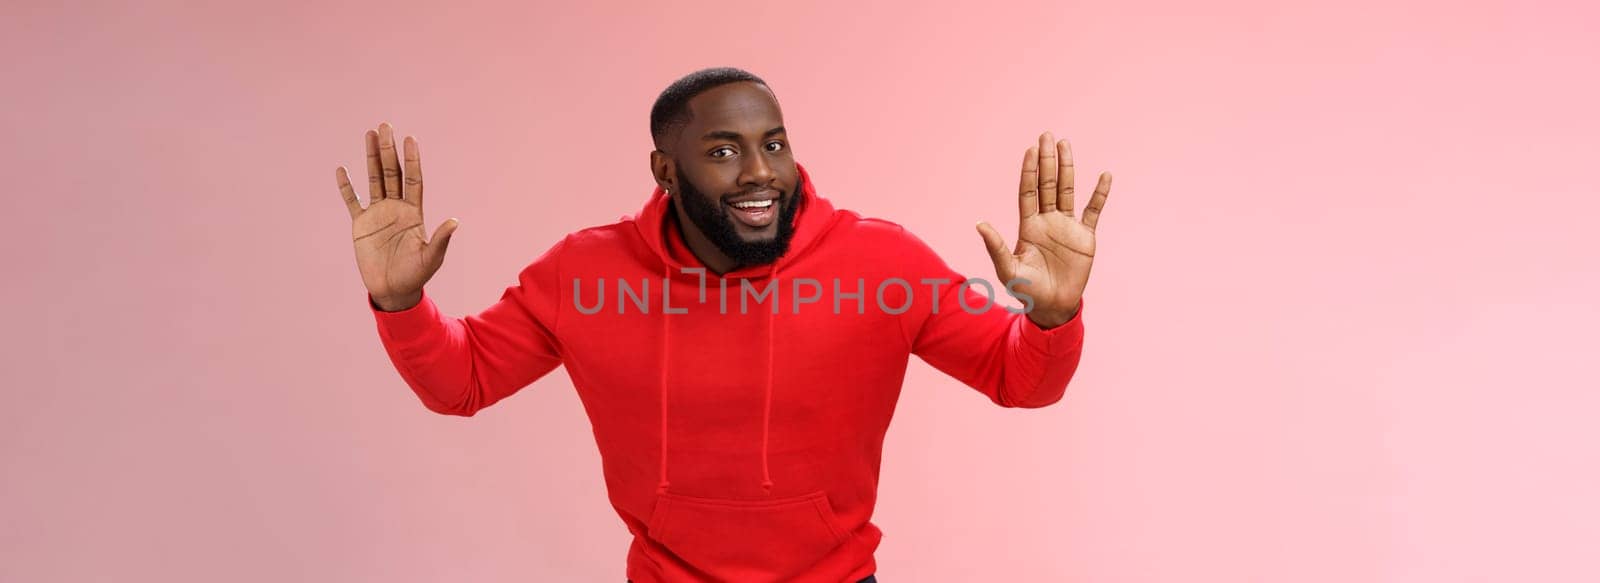 Happy charming outgoing african american male model raise hands joking standing surrender smiling give up girlfriend won grinning agree go dinner restaurant, standing pink background.